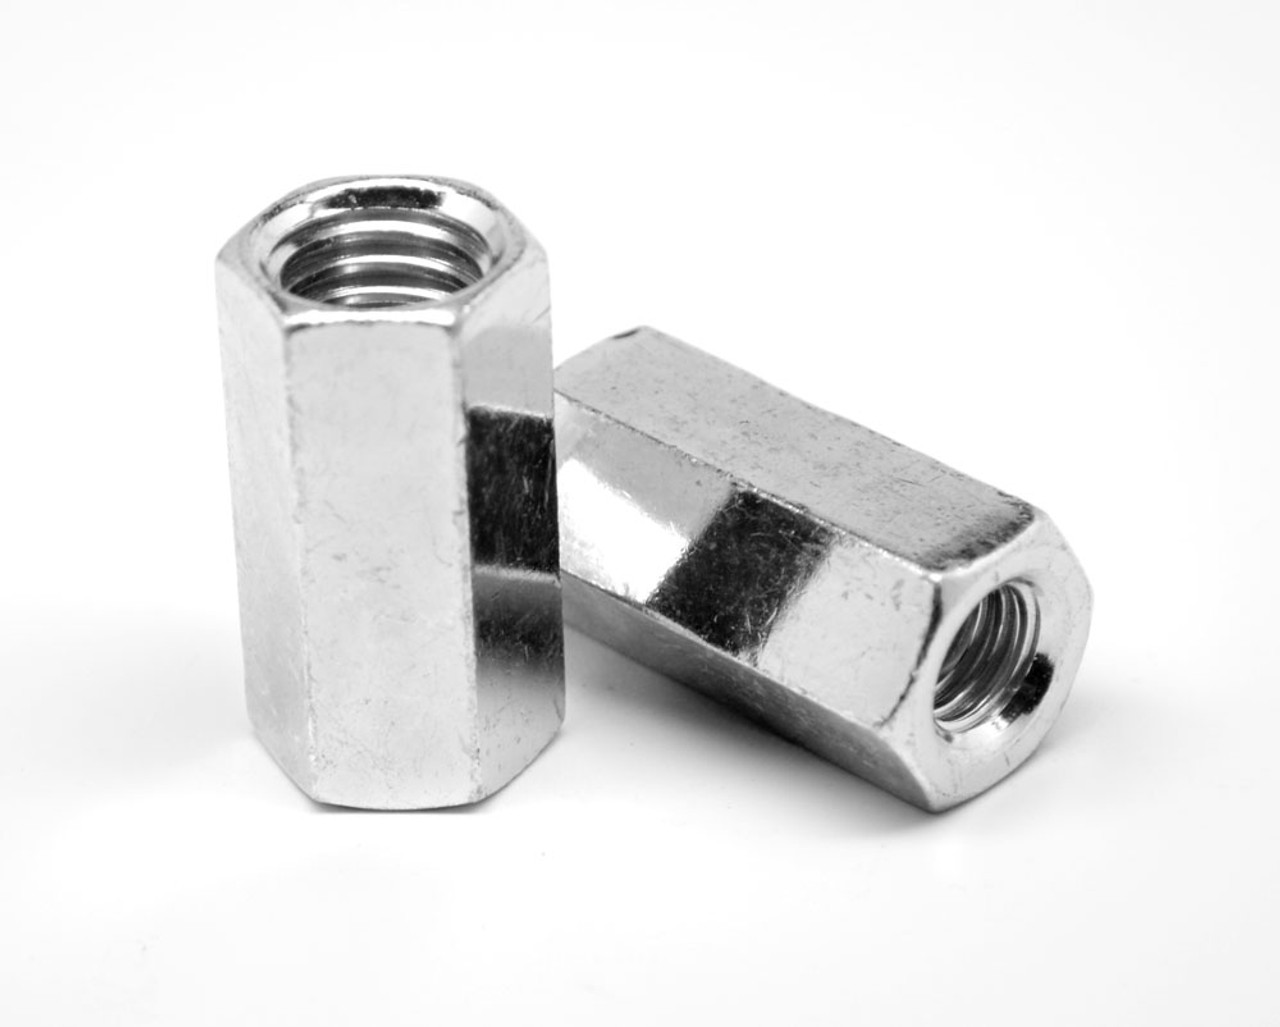 1-8 x 2 3/4 Coarse Thread Grade A Hex Rod Couping Nut Low Carbon Steel Zinc Plated